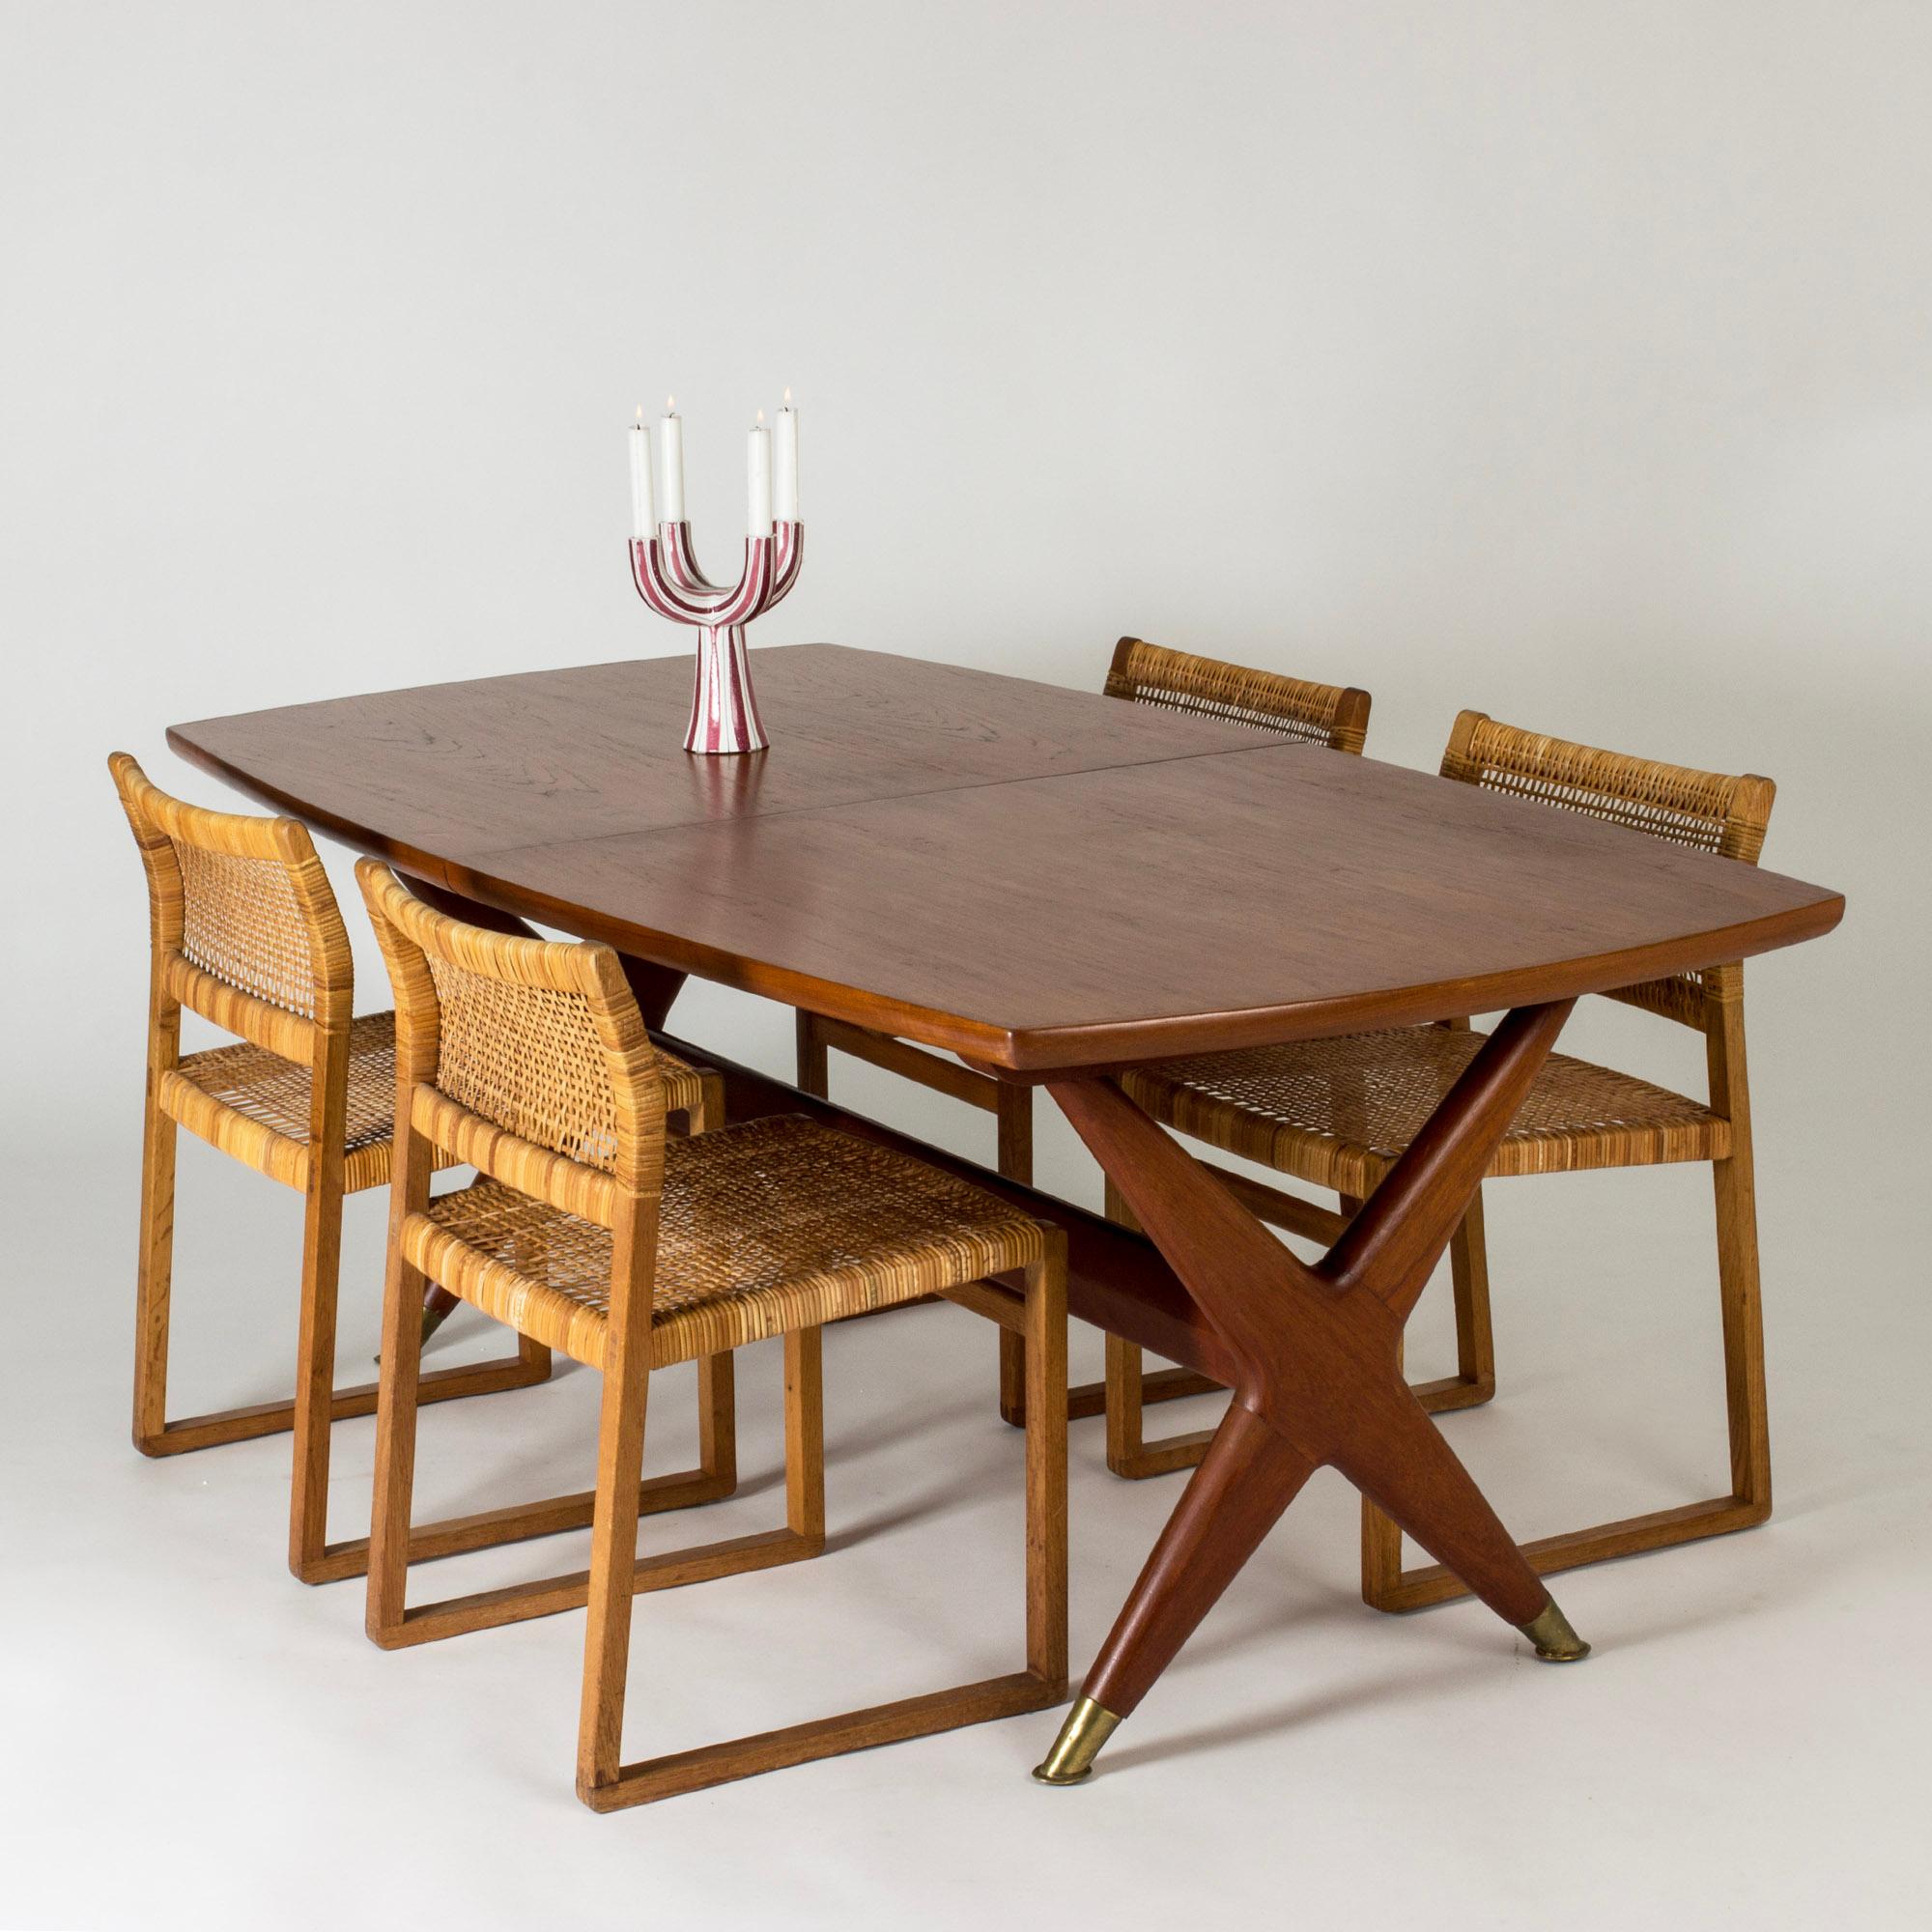 Elegant “Captain’s” dining table by Fredrik Kayser, made from teak with brass feet. Two extra leaves stored cleverly inside the table. Cool chunky design with streamlined curves.

Size: Height 71.5 cm, width 190 + 35 + 35 cm (total length with